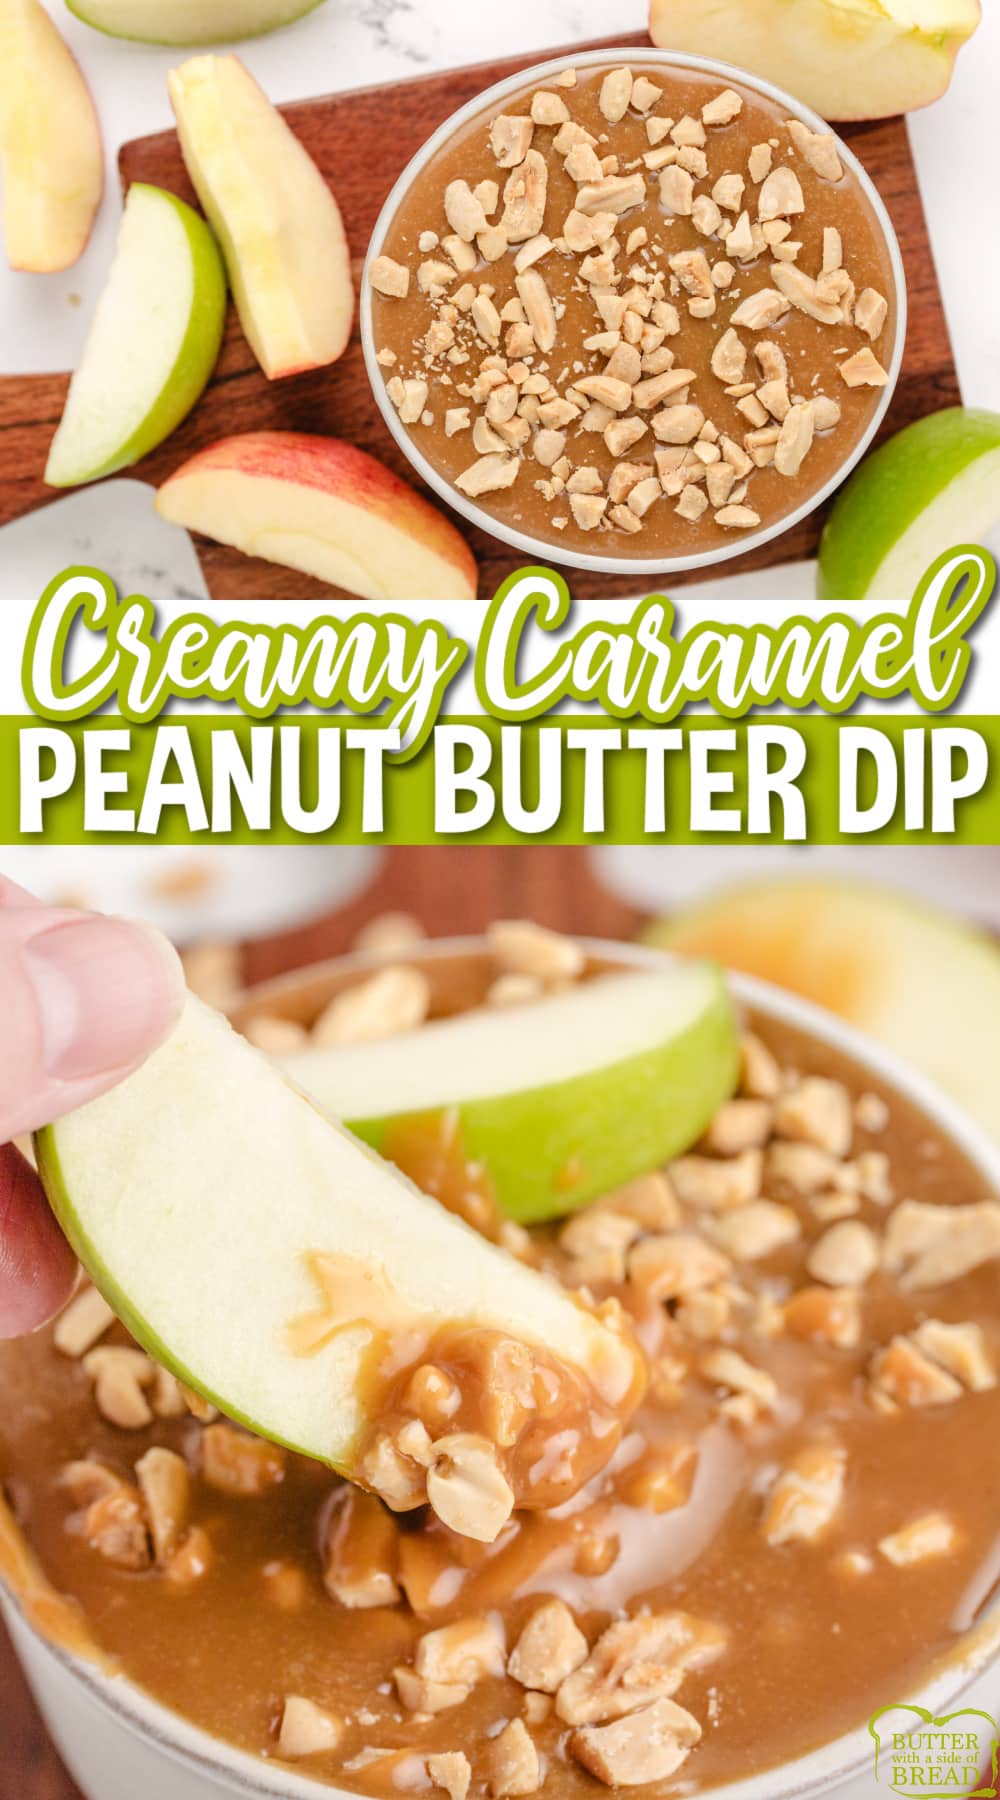 Caramel Peanut Butter Dip is made with 4 simple ingredients and is perfect for dipping apples. Made with melted caramels, milk, peanut butter, and chopped peanuts in less than 5 minutes!